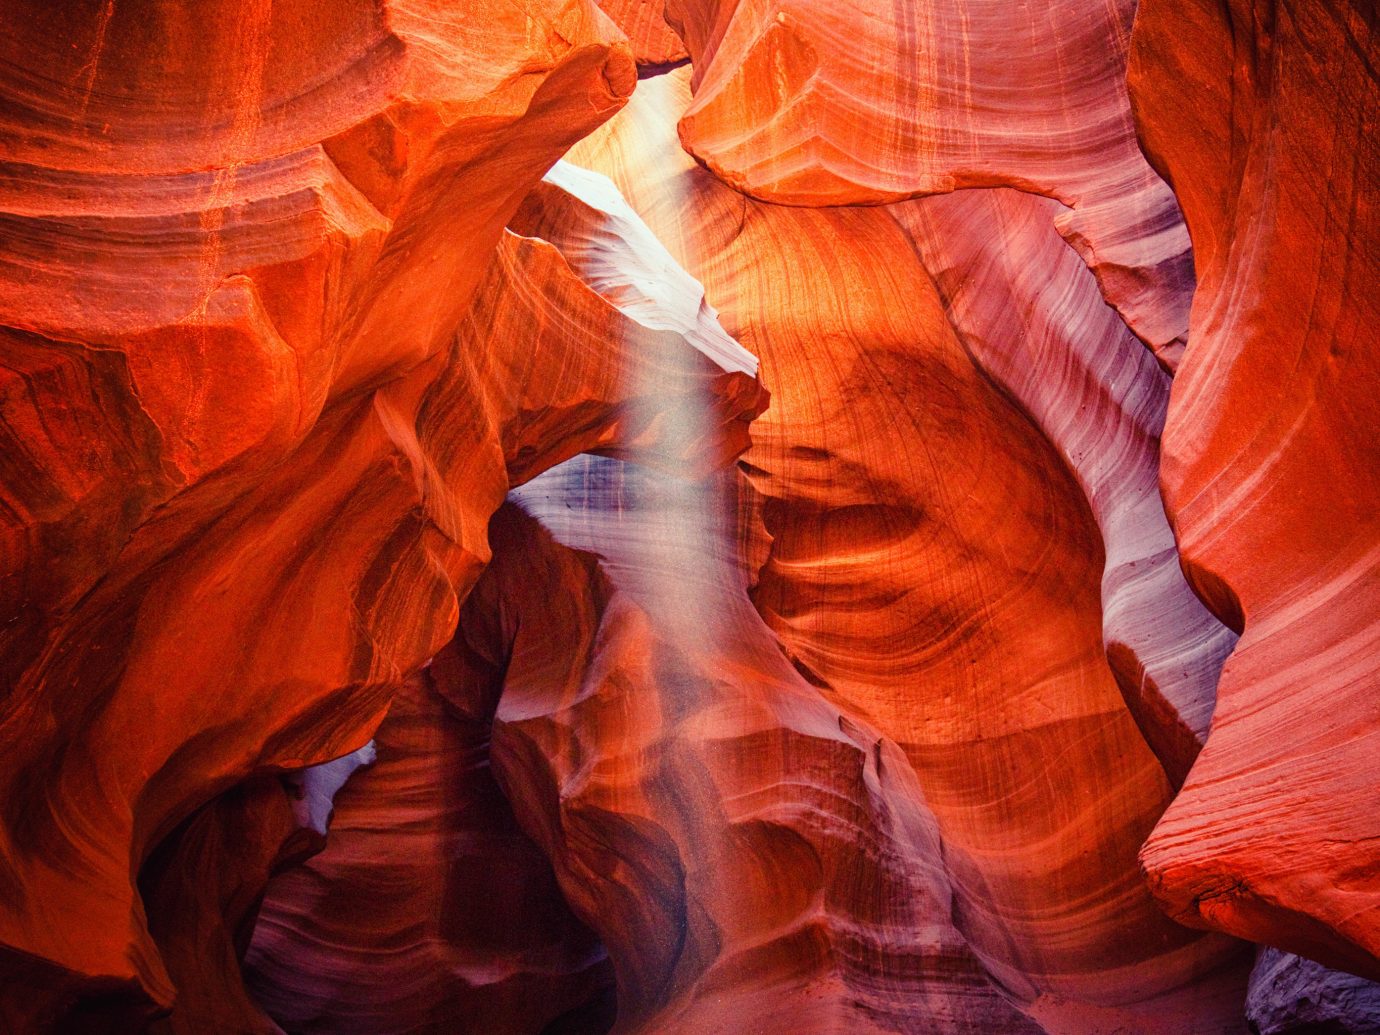 America American Southwest Road Trips valley canyon Nature red pink light orange formation rock textile sunlight computer wallpaper girl landscape petal